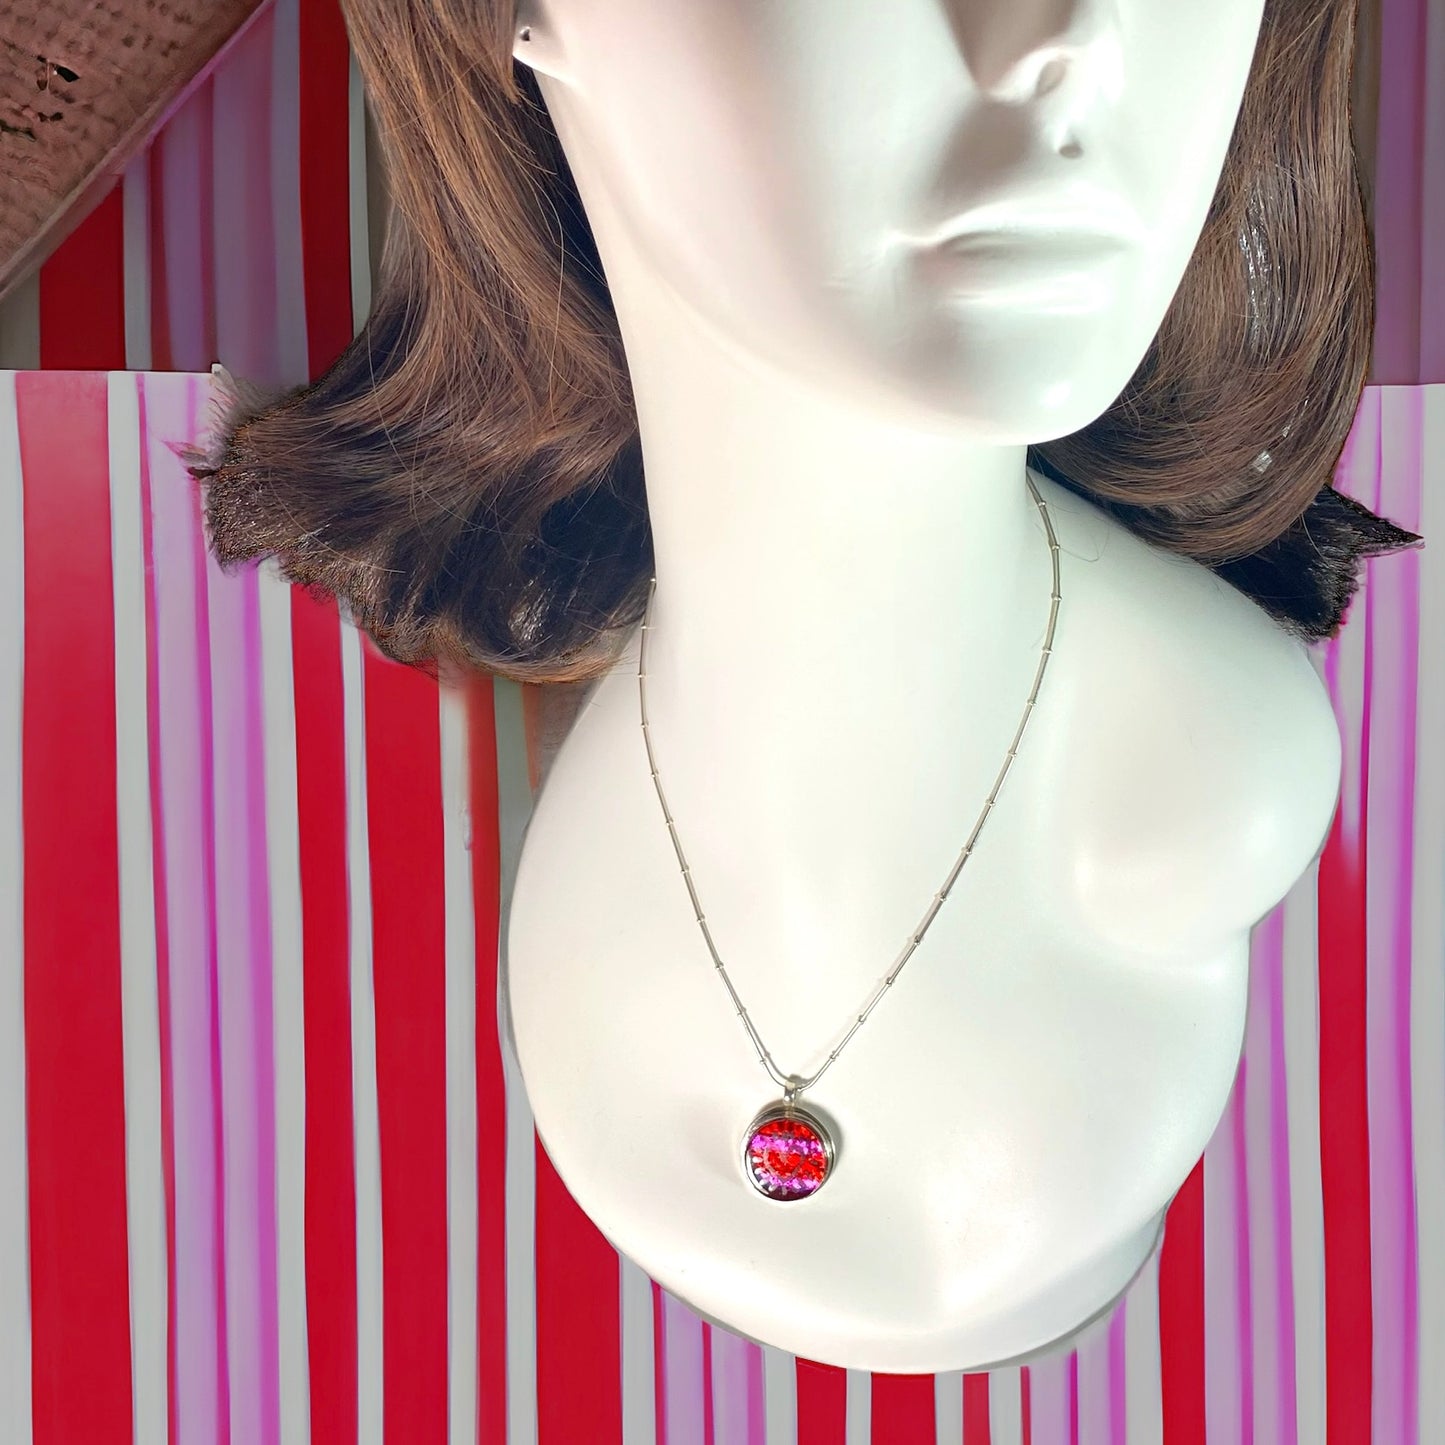 Painted Heart Necklace in Stripes with Cherry & Flamingo